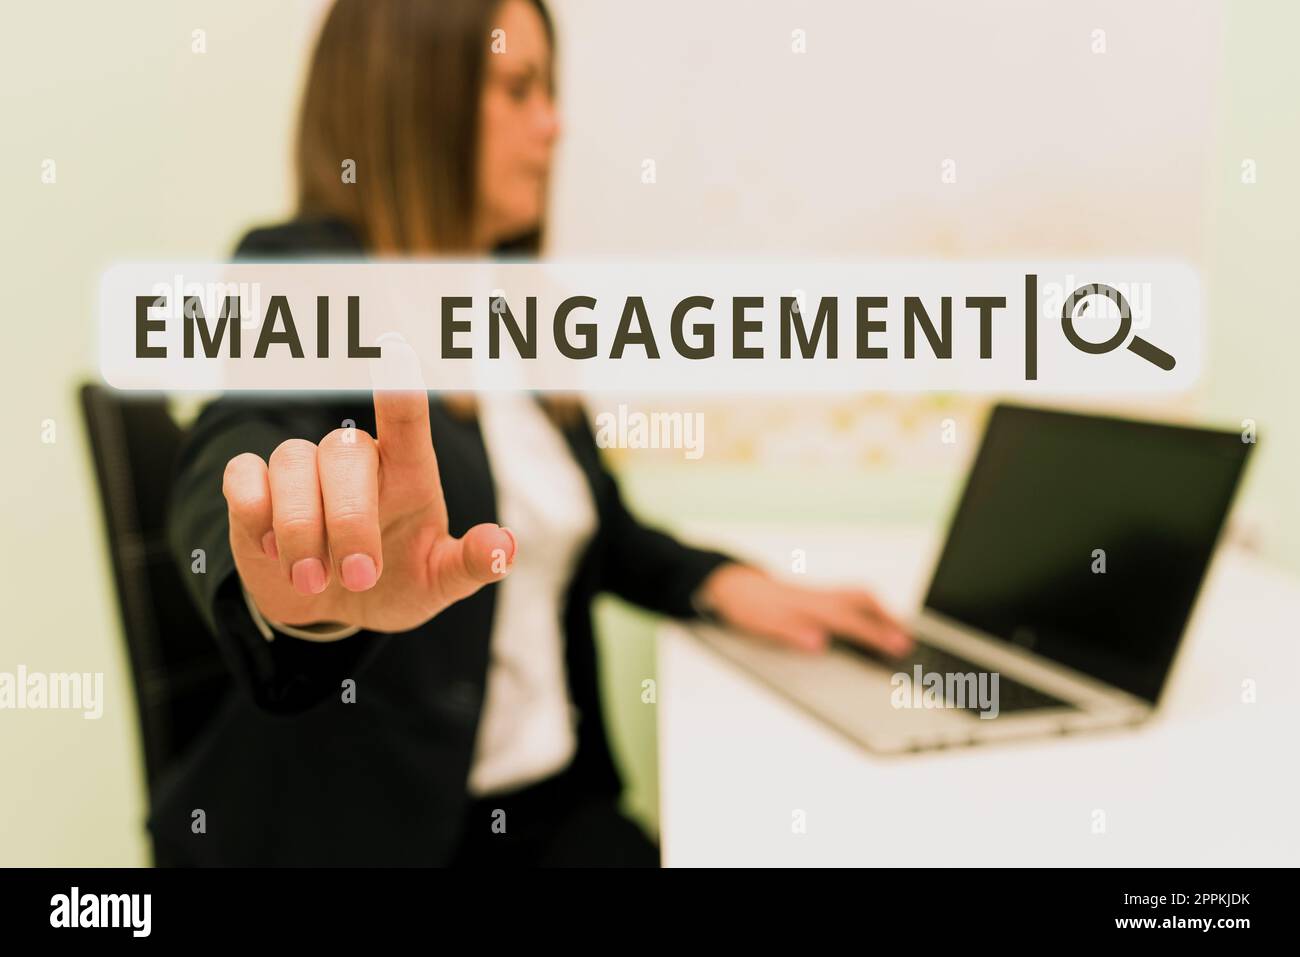 Text sign showing Email Engagement. Concept meaning measure how subscribers engage in the email campaigns Stock Photo